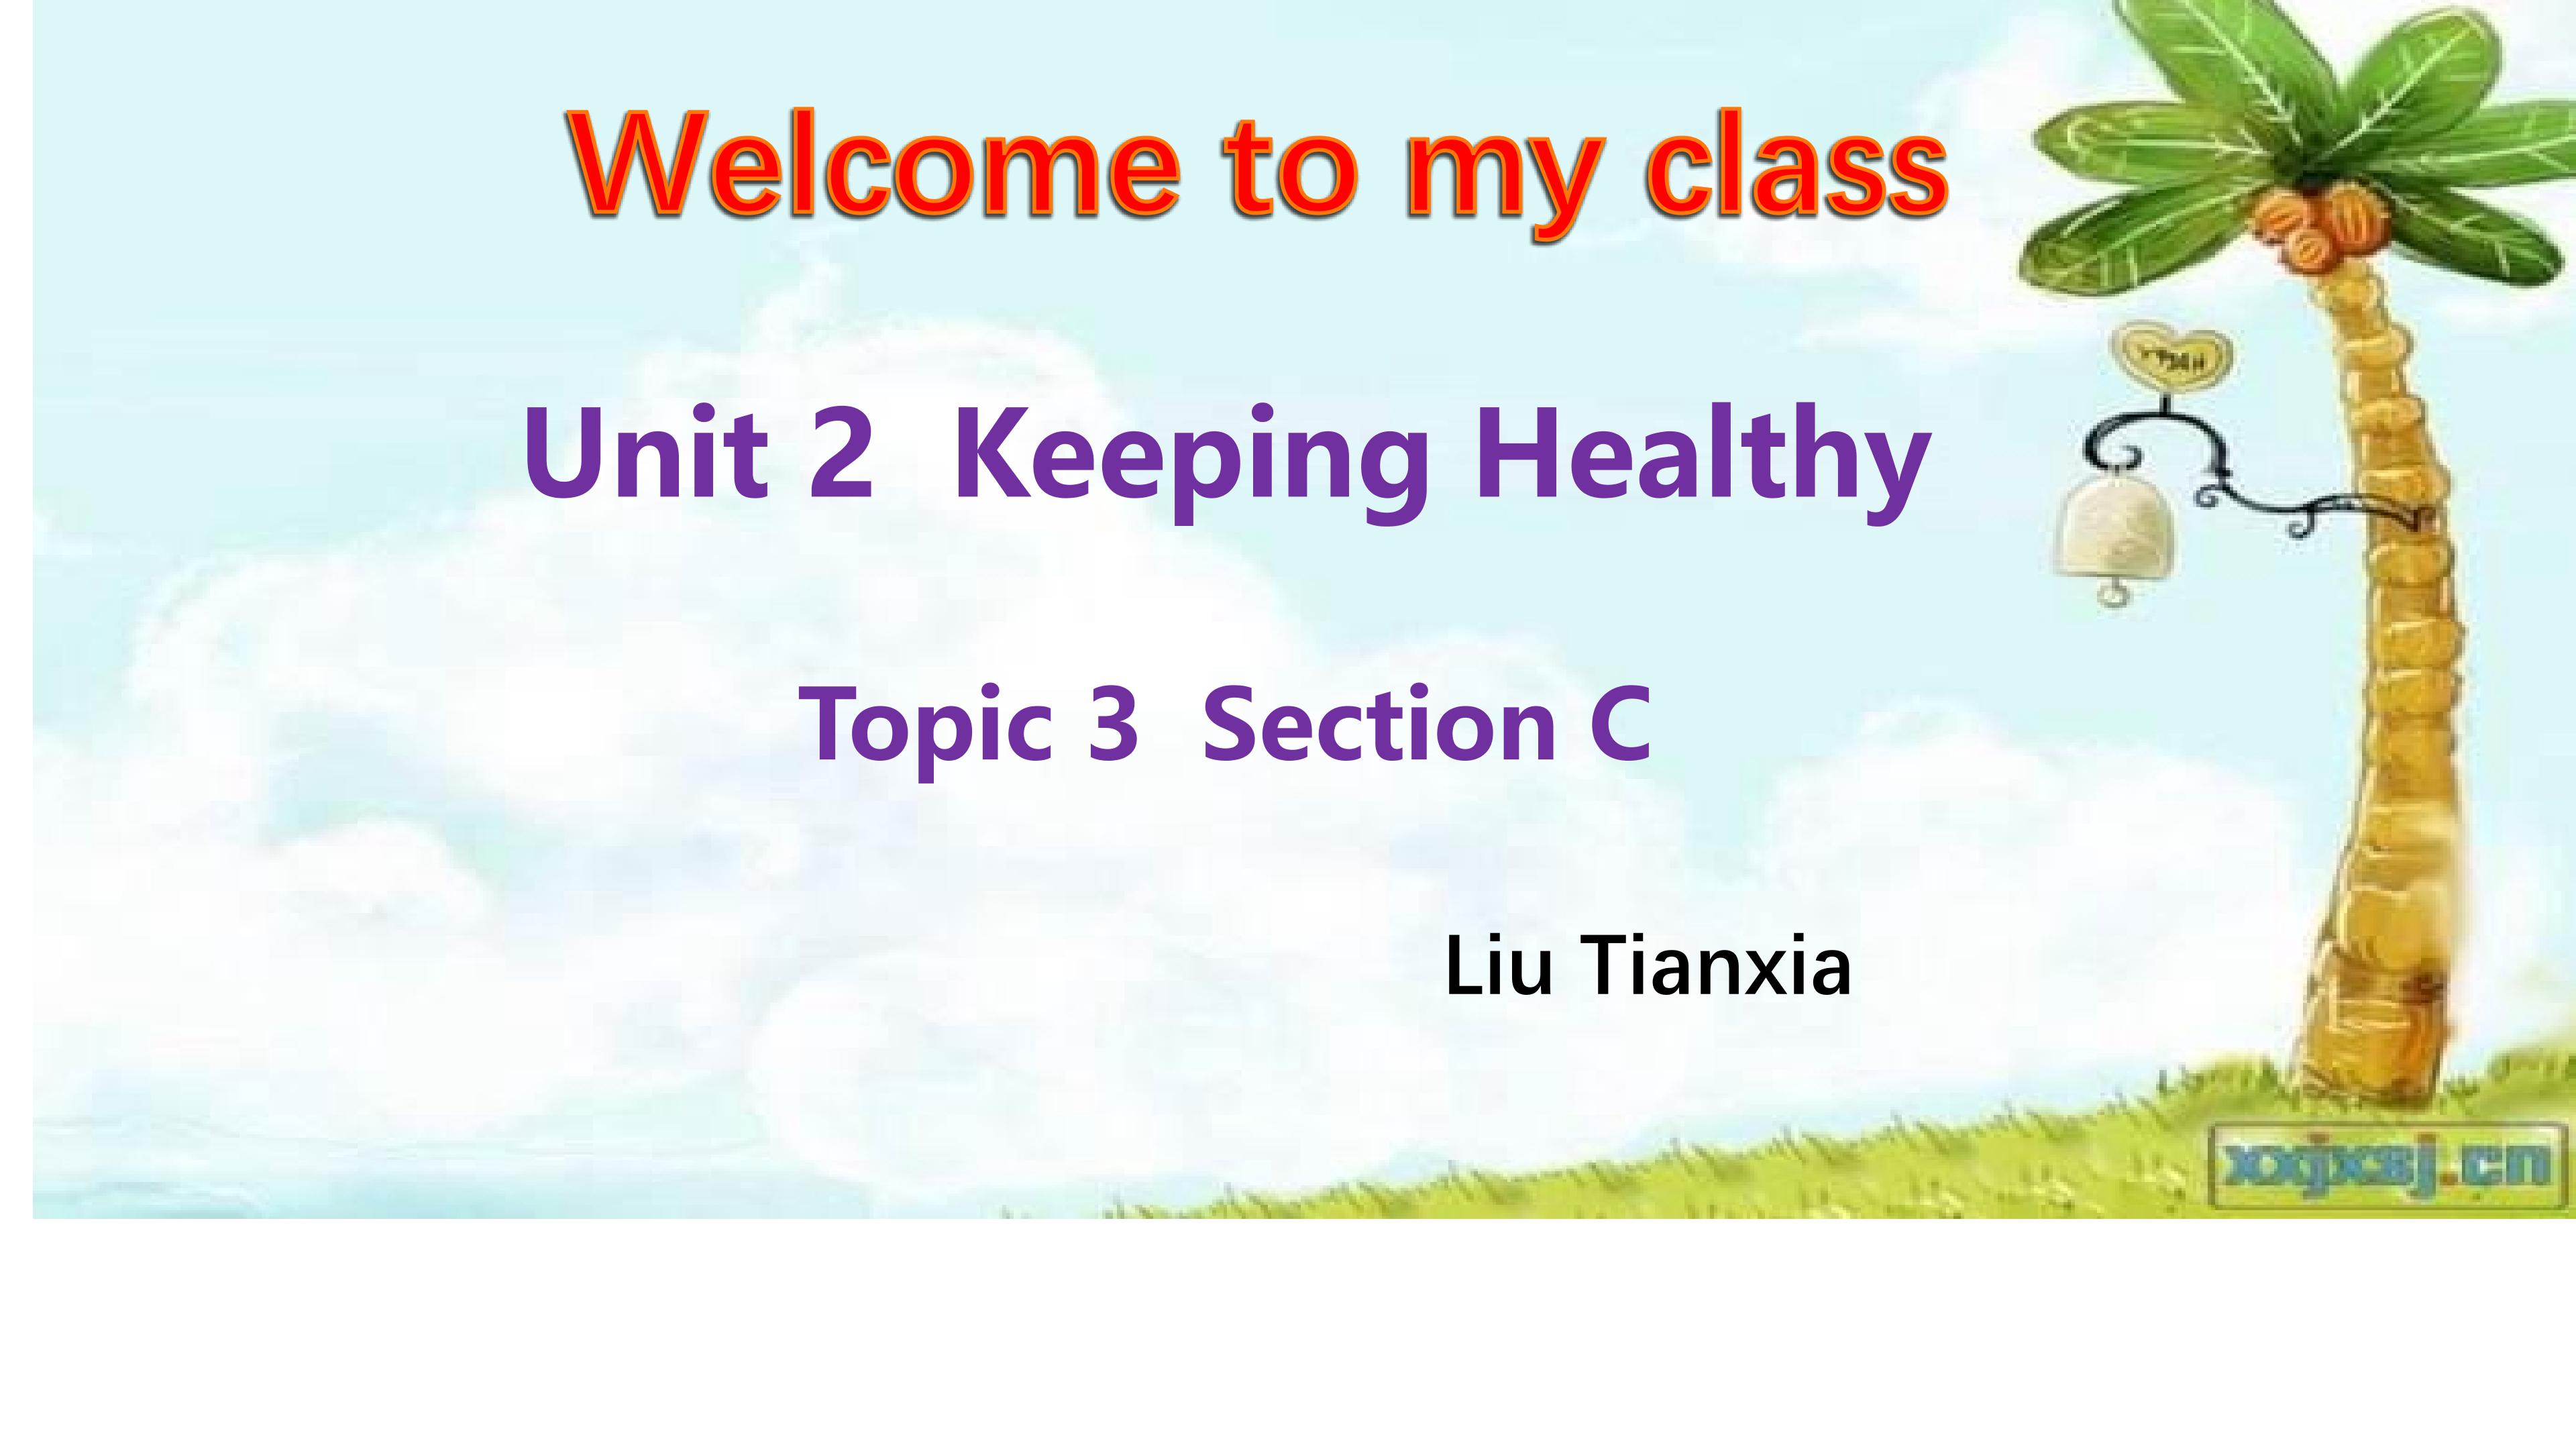 unit 2 topic 3 section c